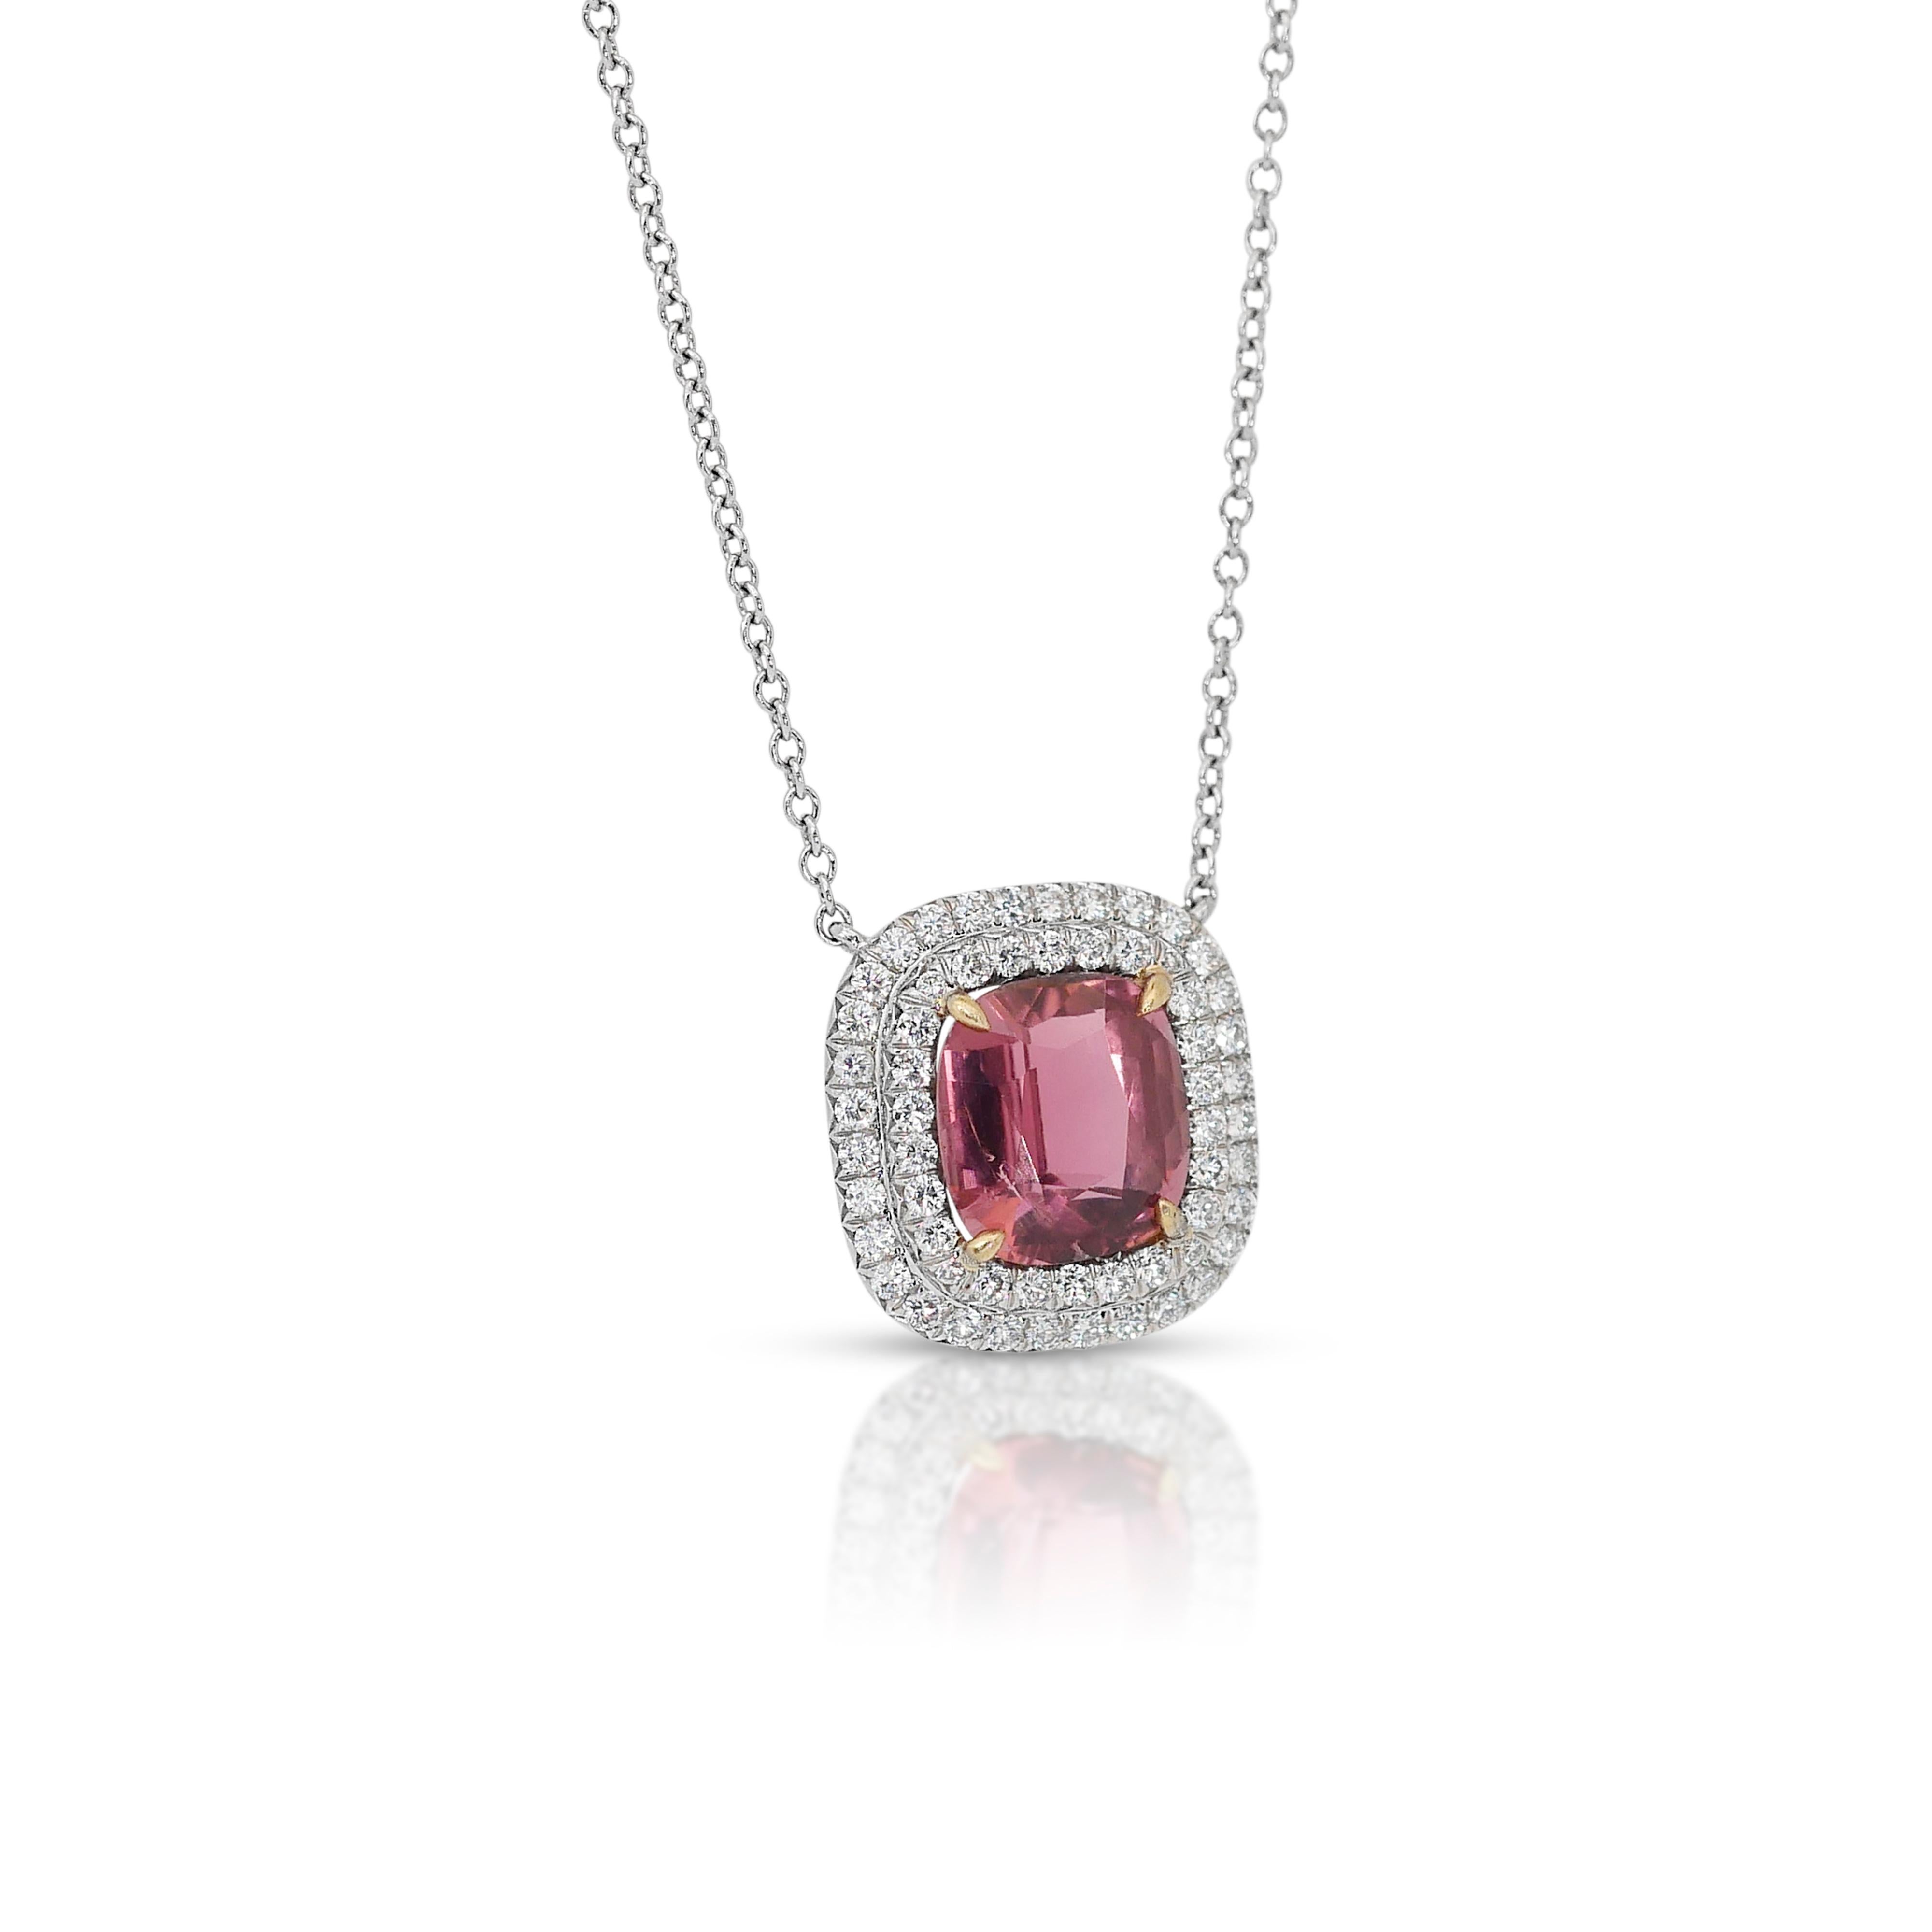 Alluring 2.70ct Tourmaline and Diamonds Halo Necklace in 18k White & Yellow Gold In New Condition For Sale In רמת גן, IL